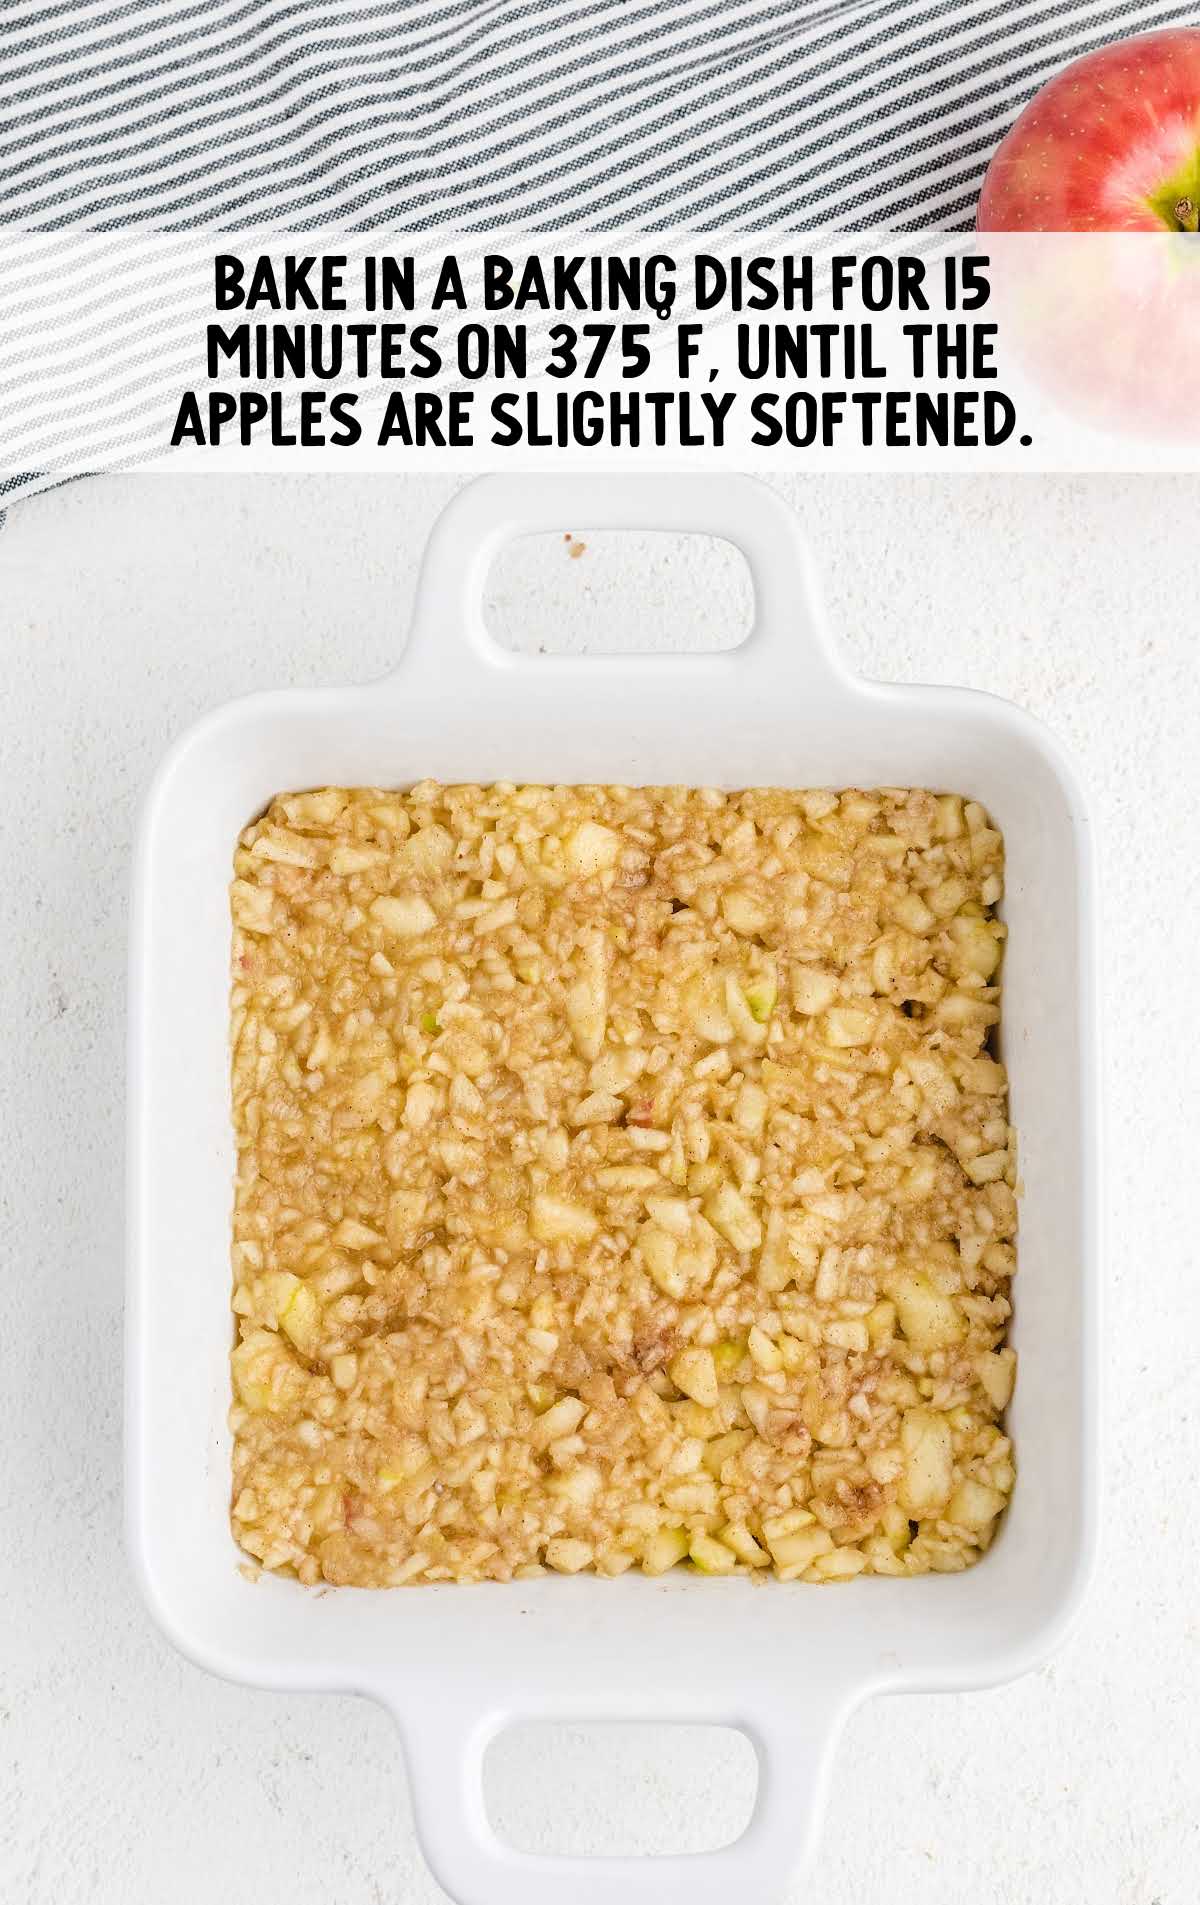 apples baked in a baking dish